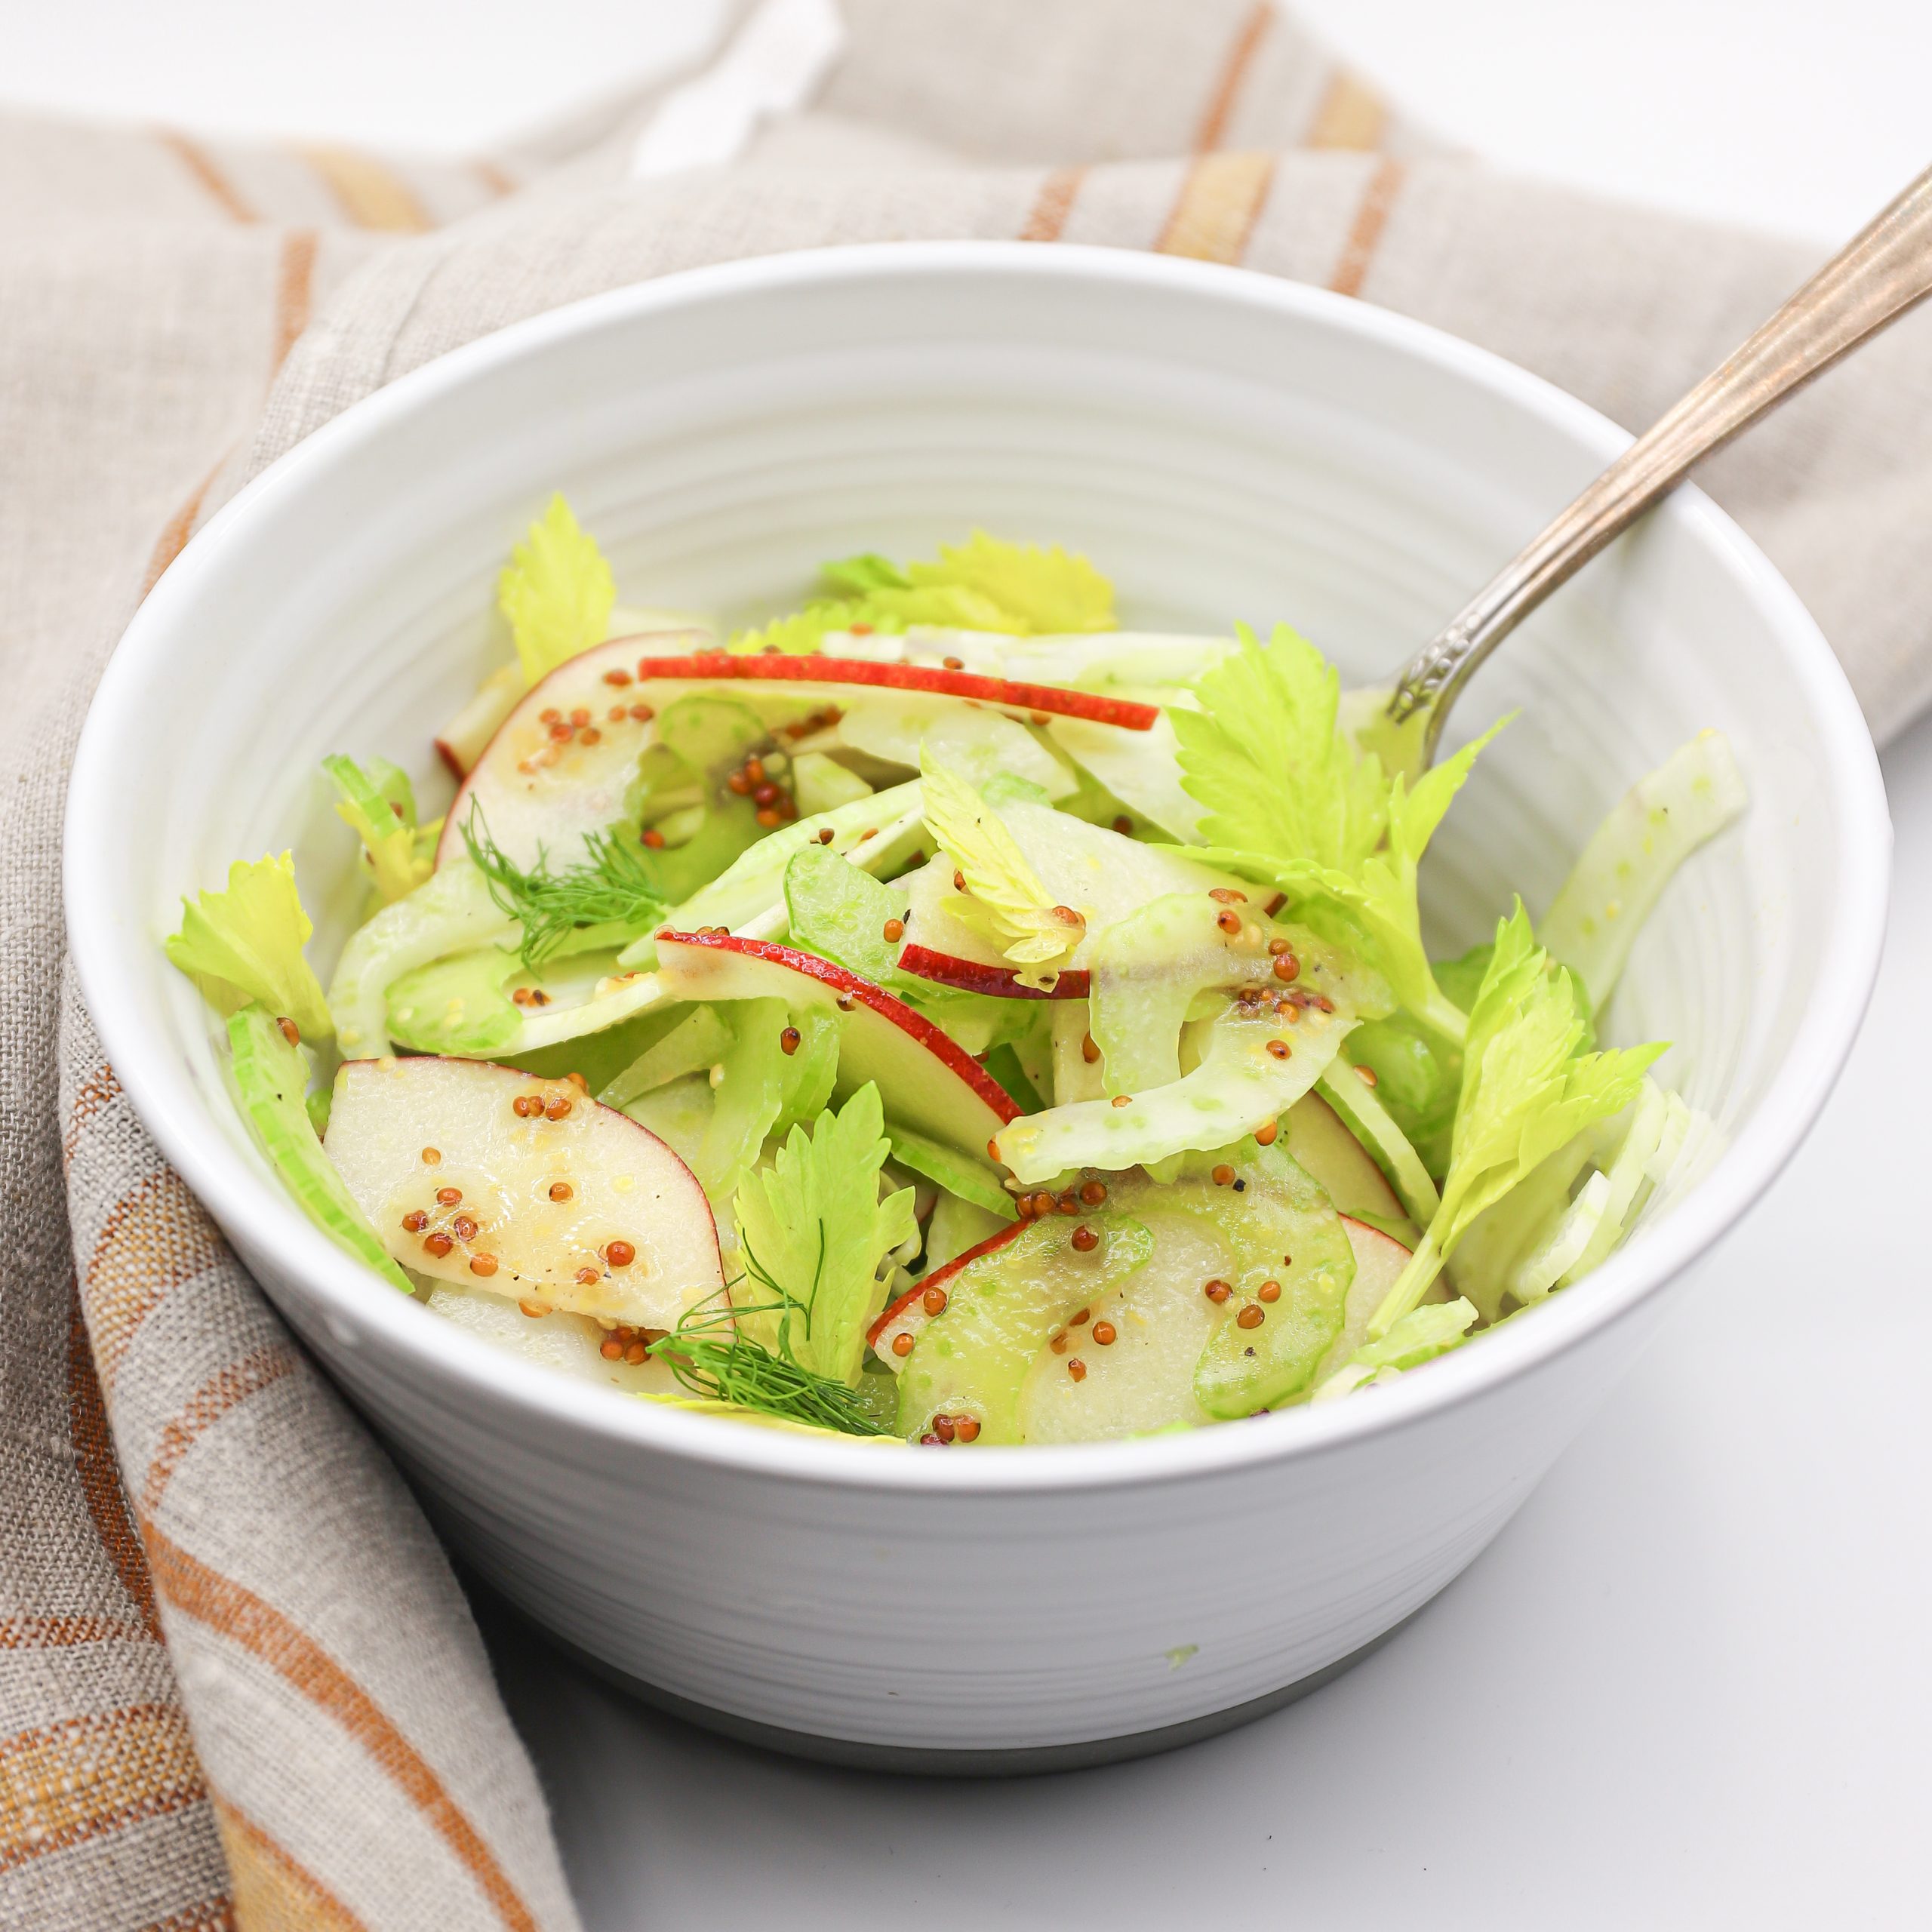 Easy Winter Salad of Apple Celery and Fennel with a Grainy Mustard Vinaigrette